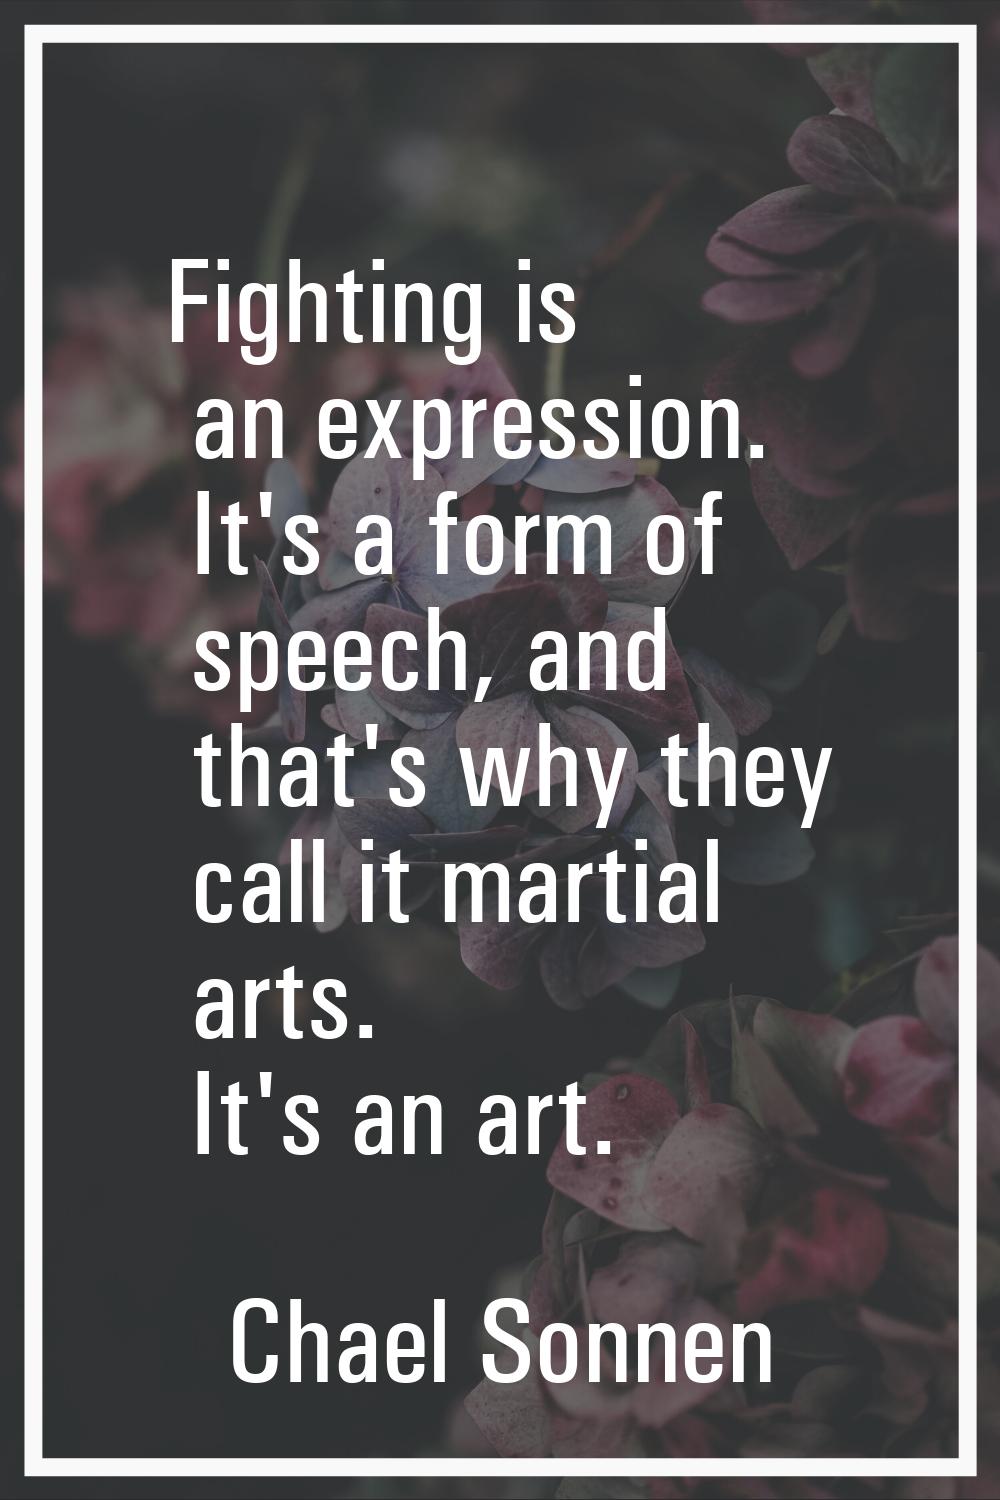 Fighting is an expression. It's a form of speech, and that's why they call it martial arts. It's an